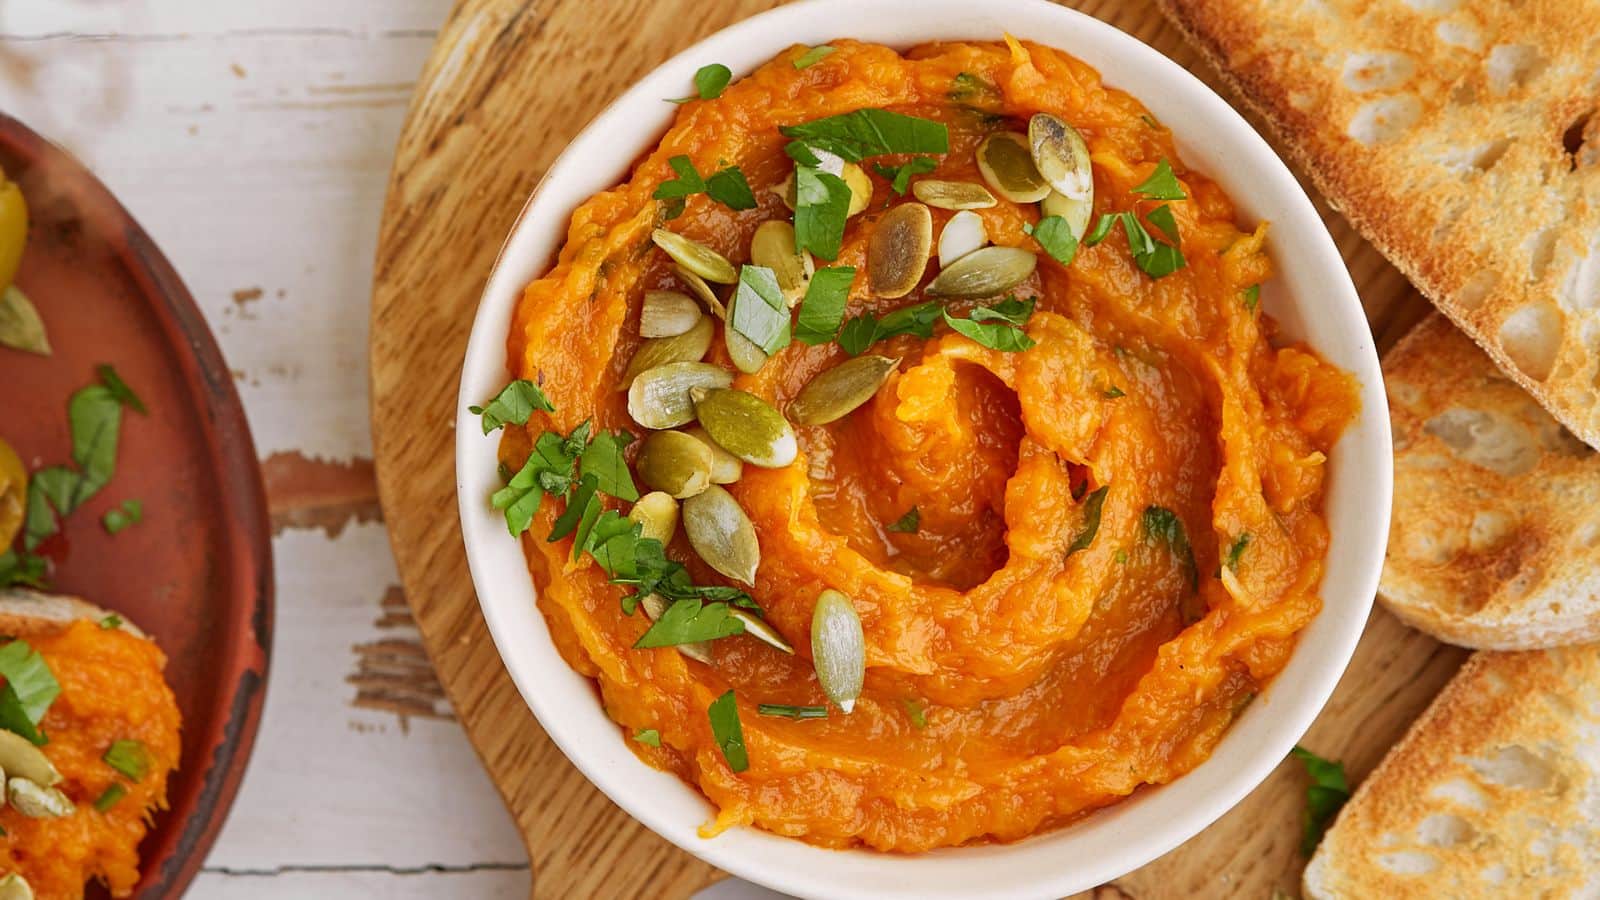 Moroccan spiced carrot hummus: A step-by-step recipe